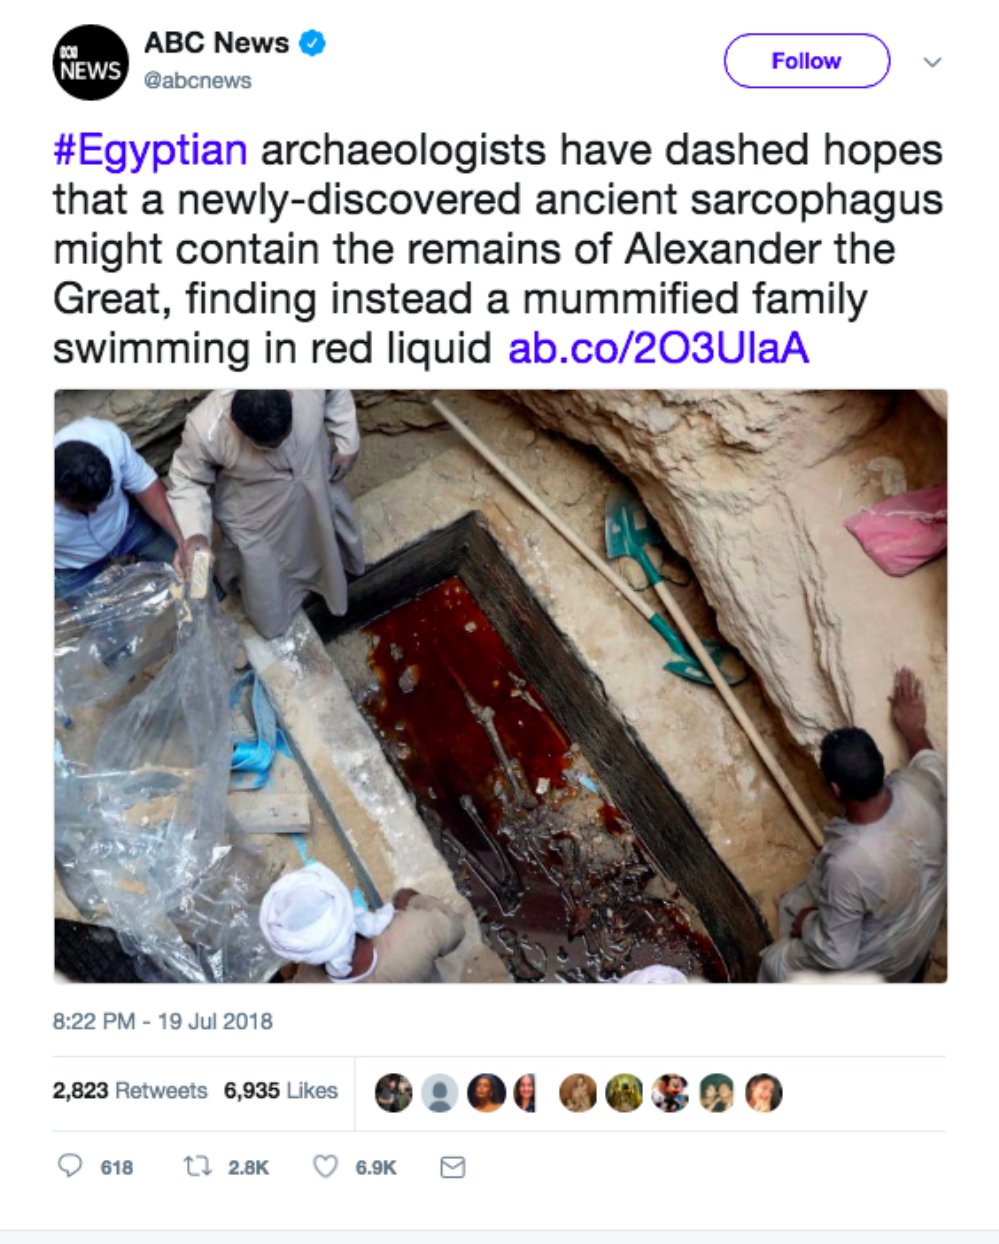 People Create Petition To Drink The Red Liquid Found In This Old Sarcophagus